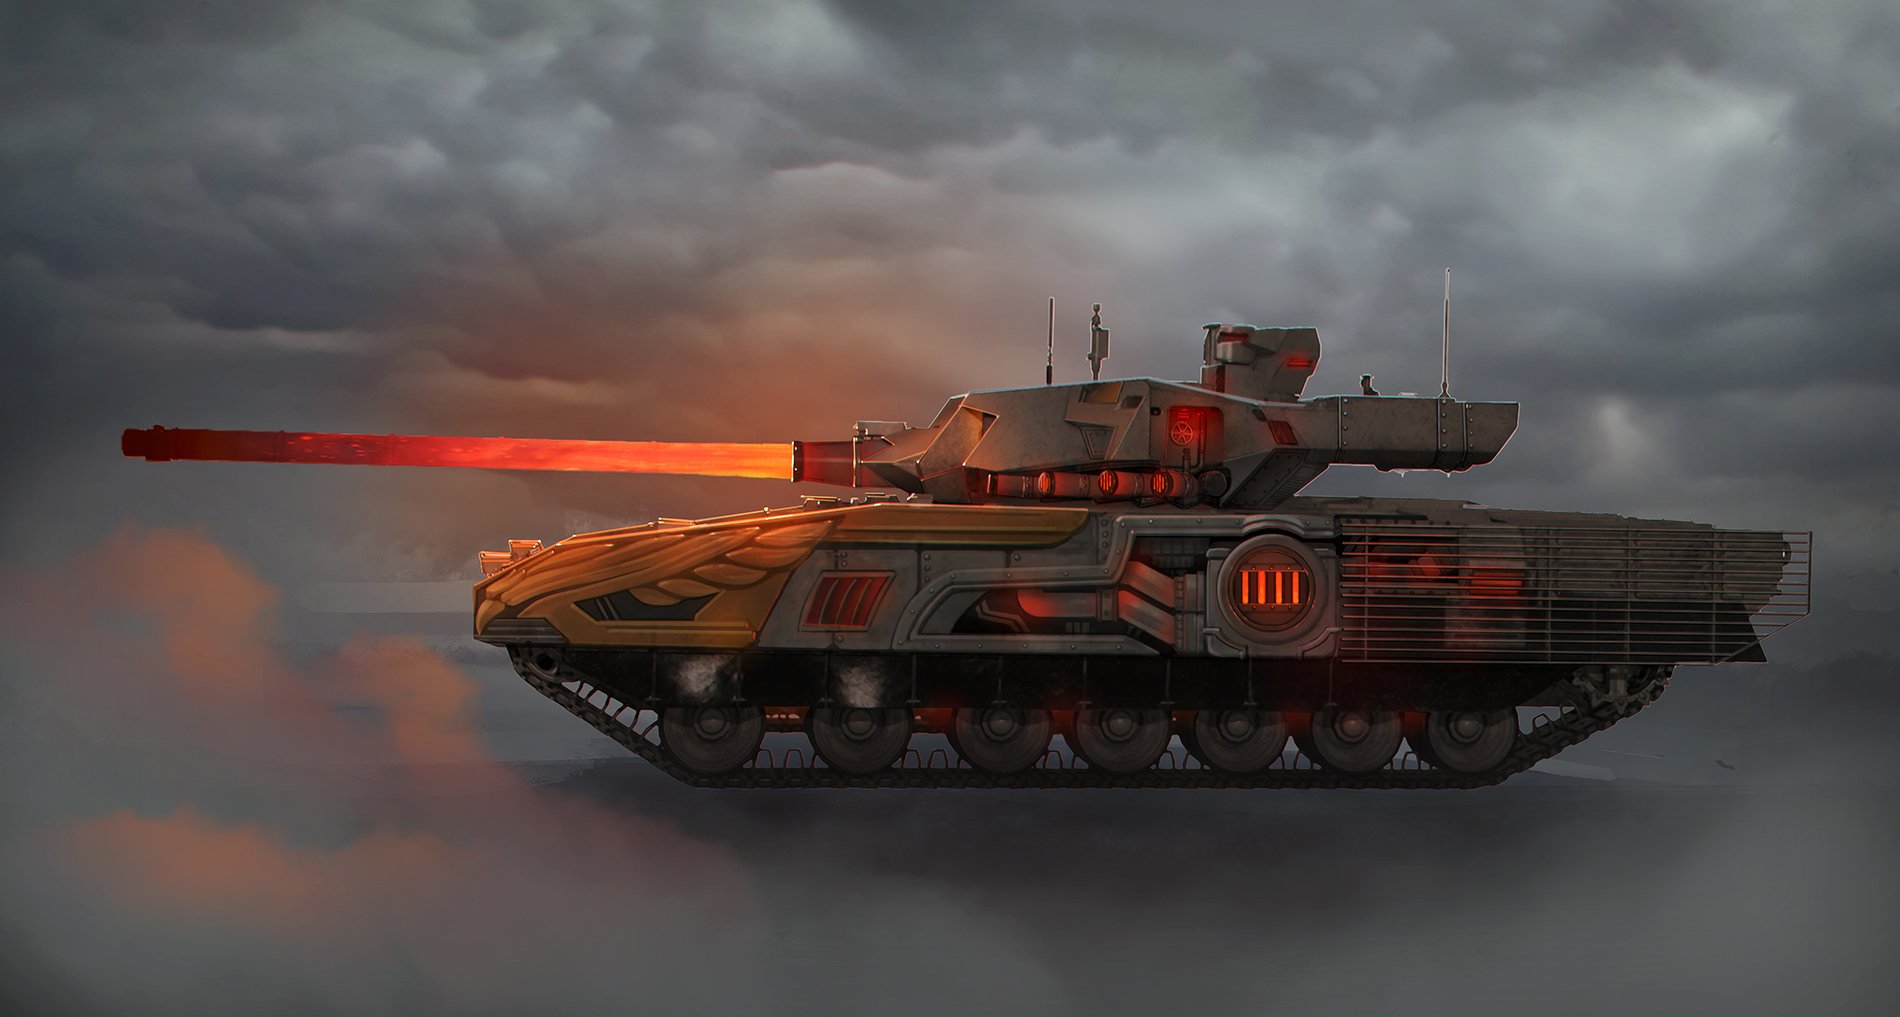 T 3 t 14 0. Armored Warfare: Армата. Т-14 Armored Warfare. Танки т90 Армада. Т 14 проект Армата.